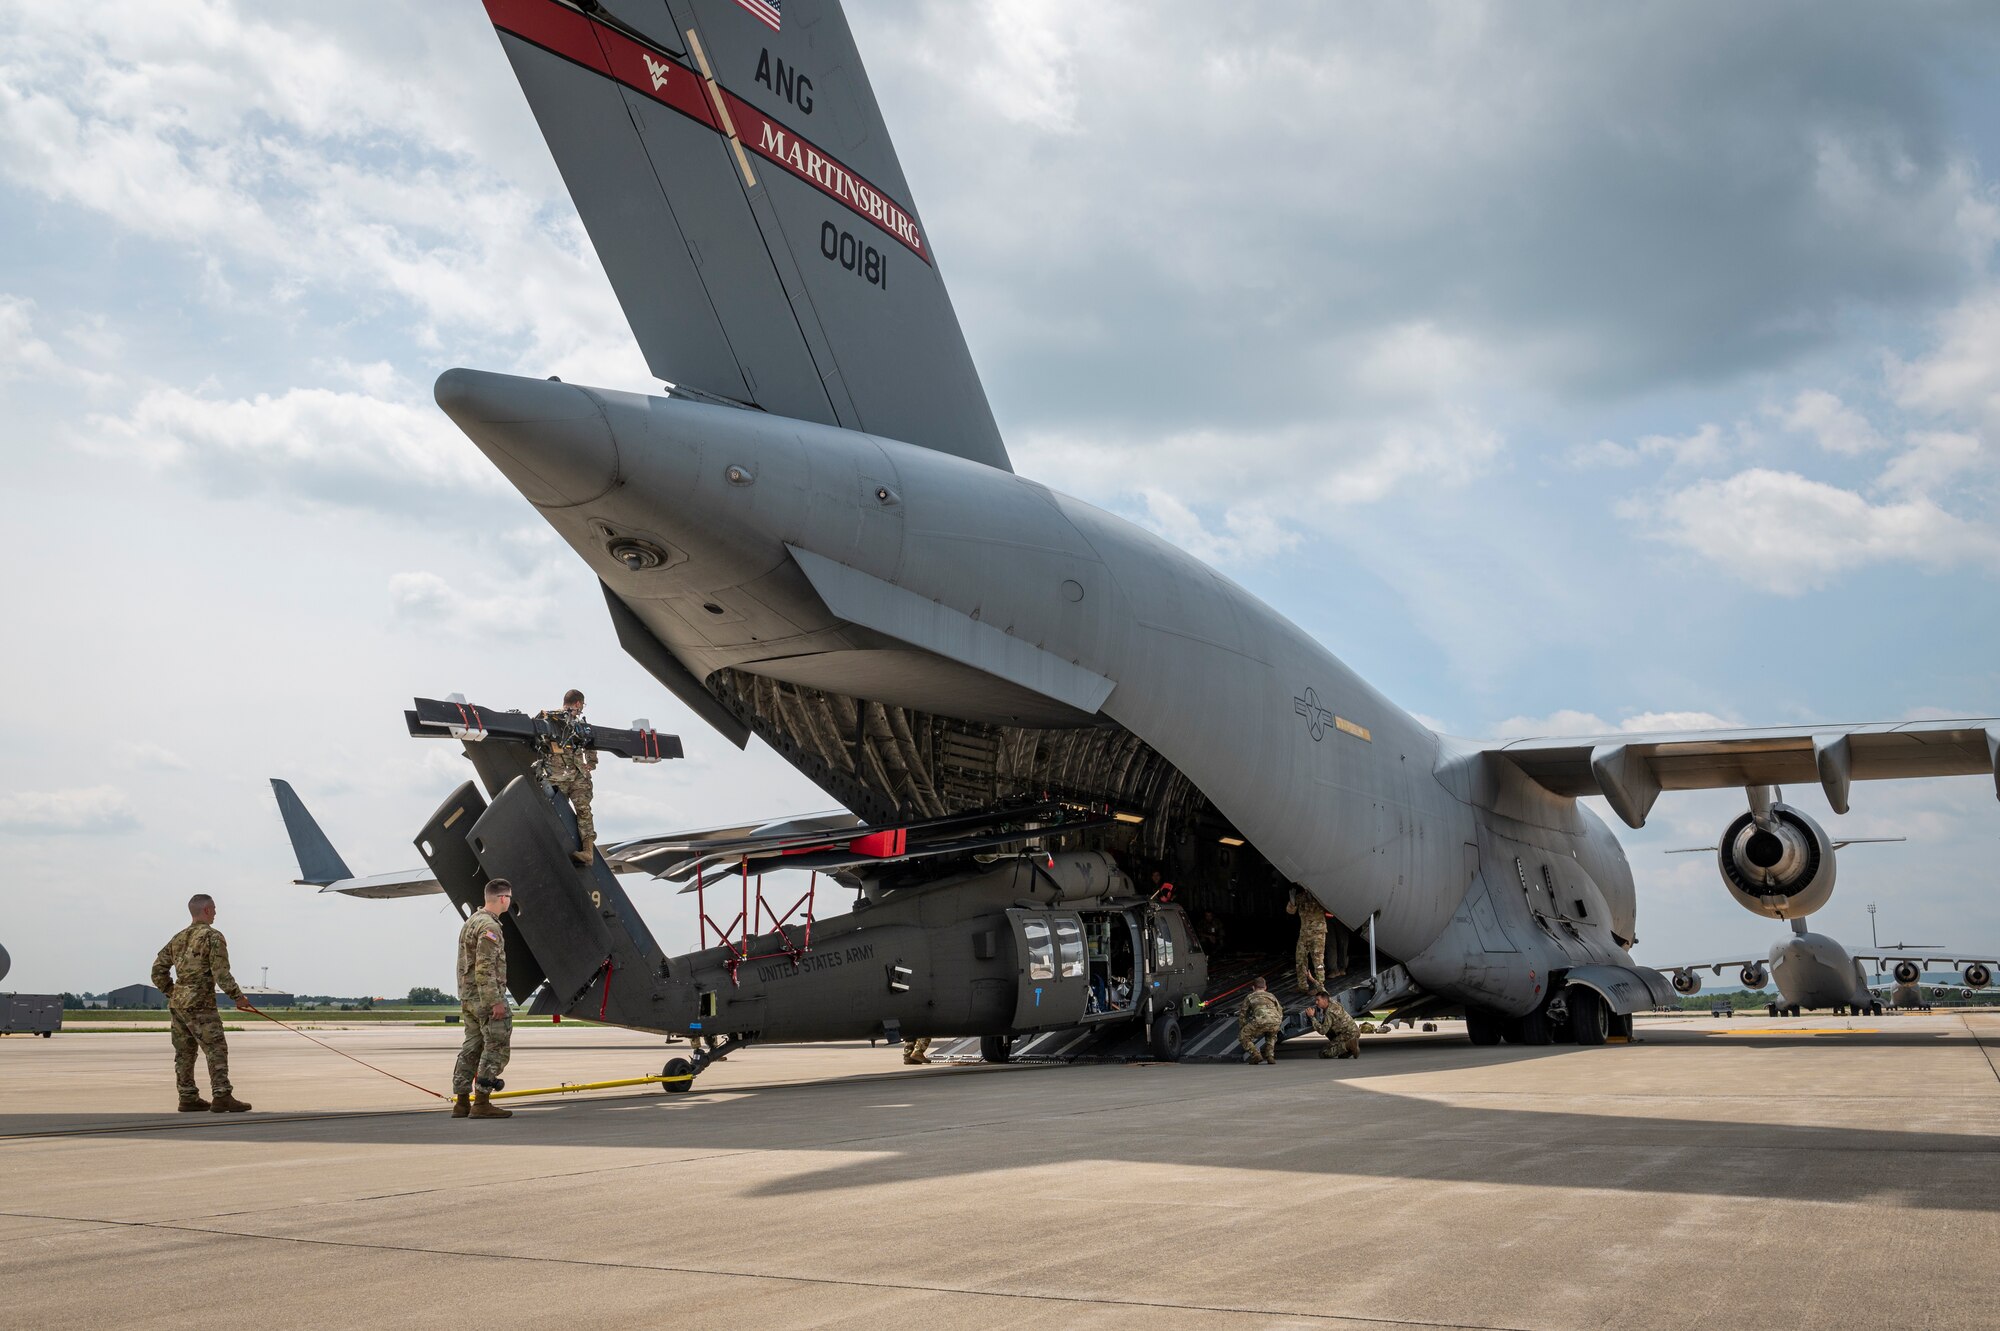 Crews from the 167th Airlift Wing and C Company, 1st Battalion, 150th Aviation Regiment conduct a joint cargo loading exercise involving a C-17 Globemaster III aircraft from the 167th and a UH-60M Black Hawk helicopter from the 150th during a readiness exercise on the 167th Airlift Wing flight line, Martinsburg, West Virginia, Aug. 11, 2023.